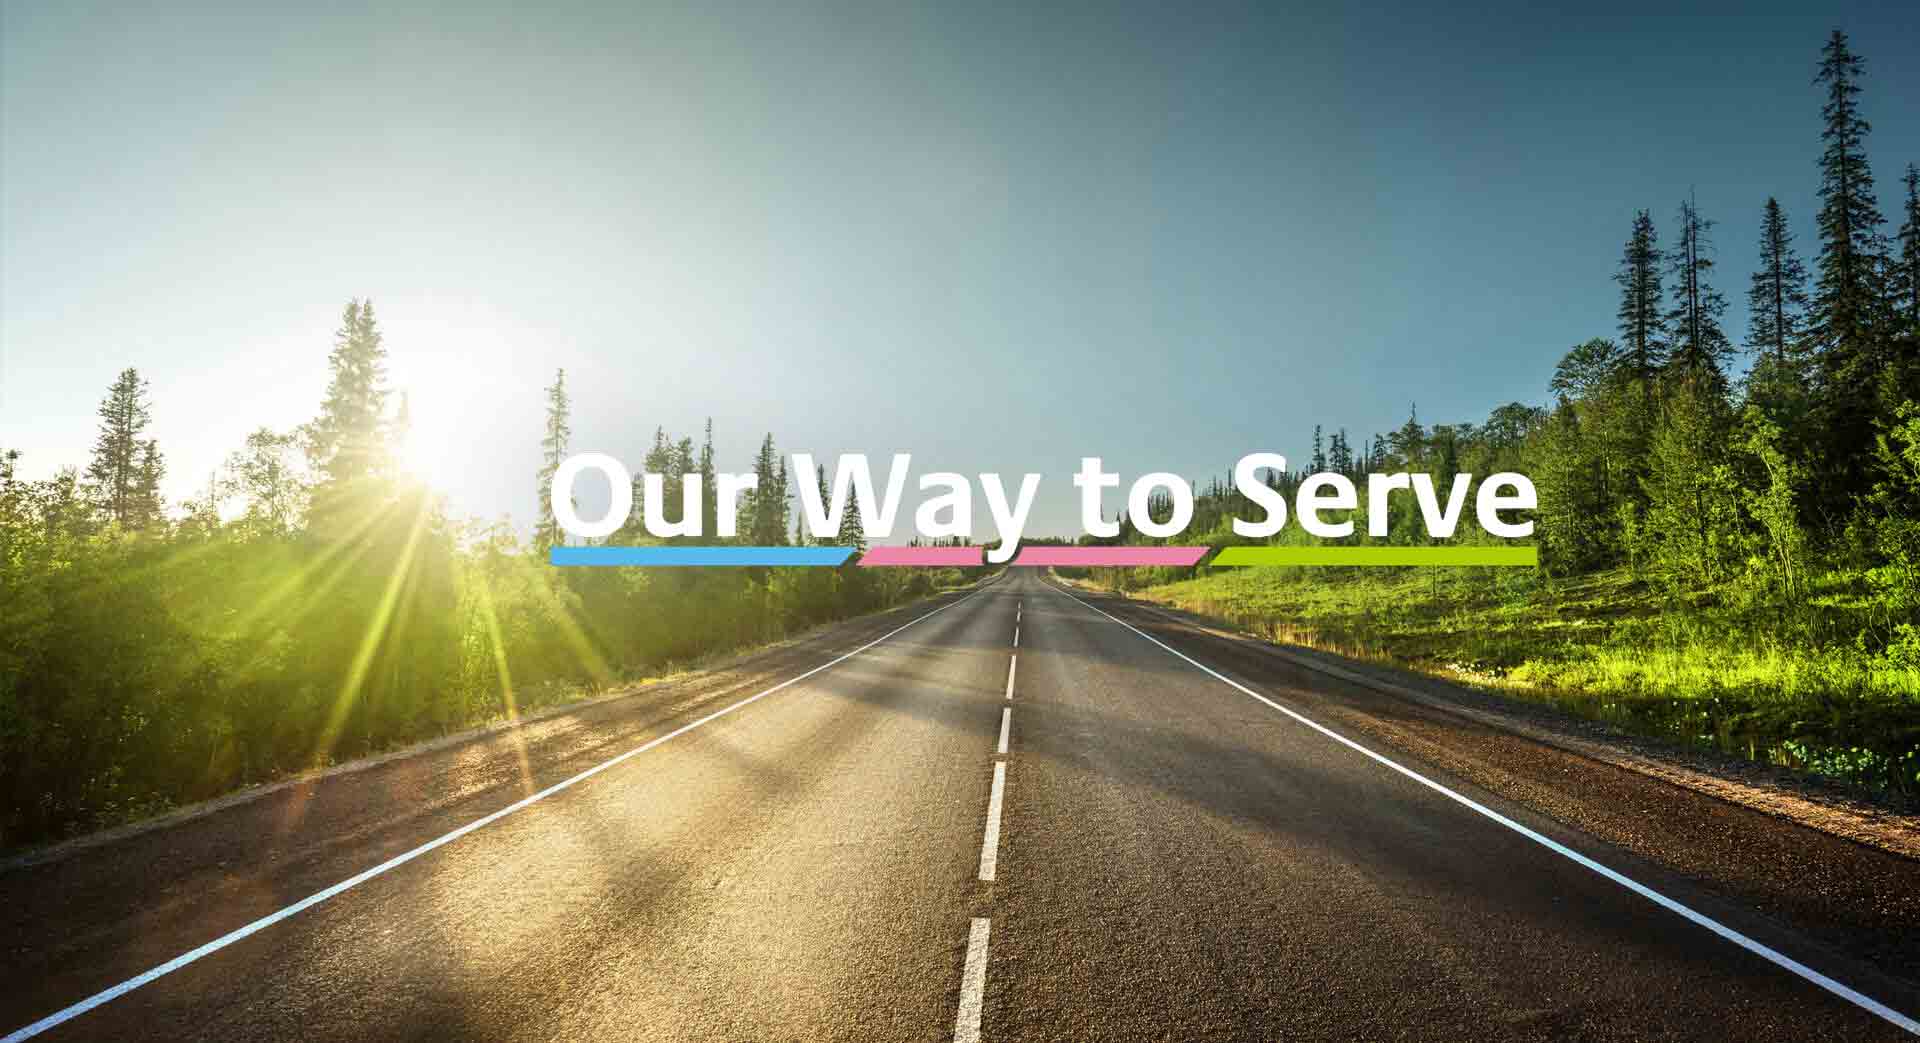 Our Way to Serve